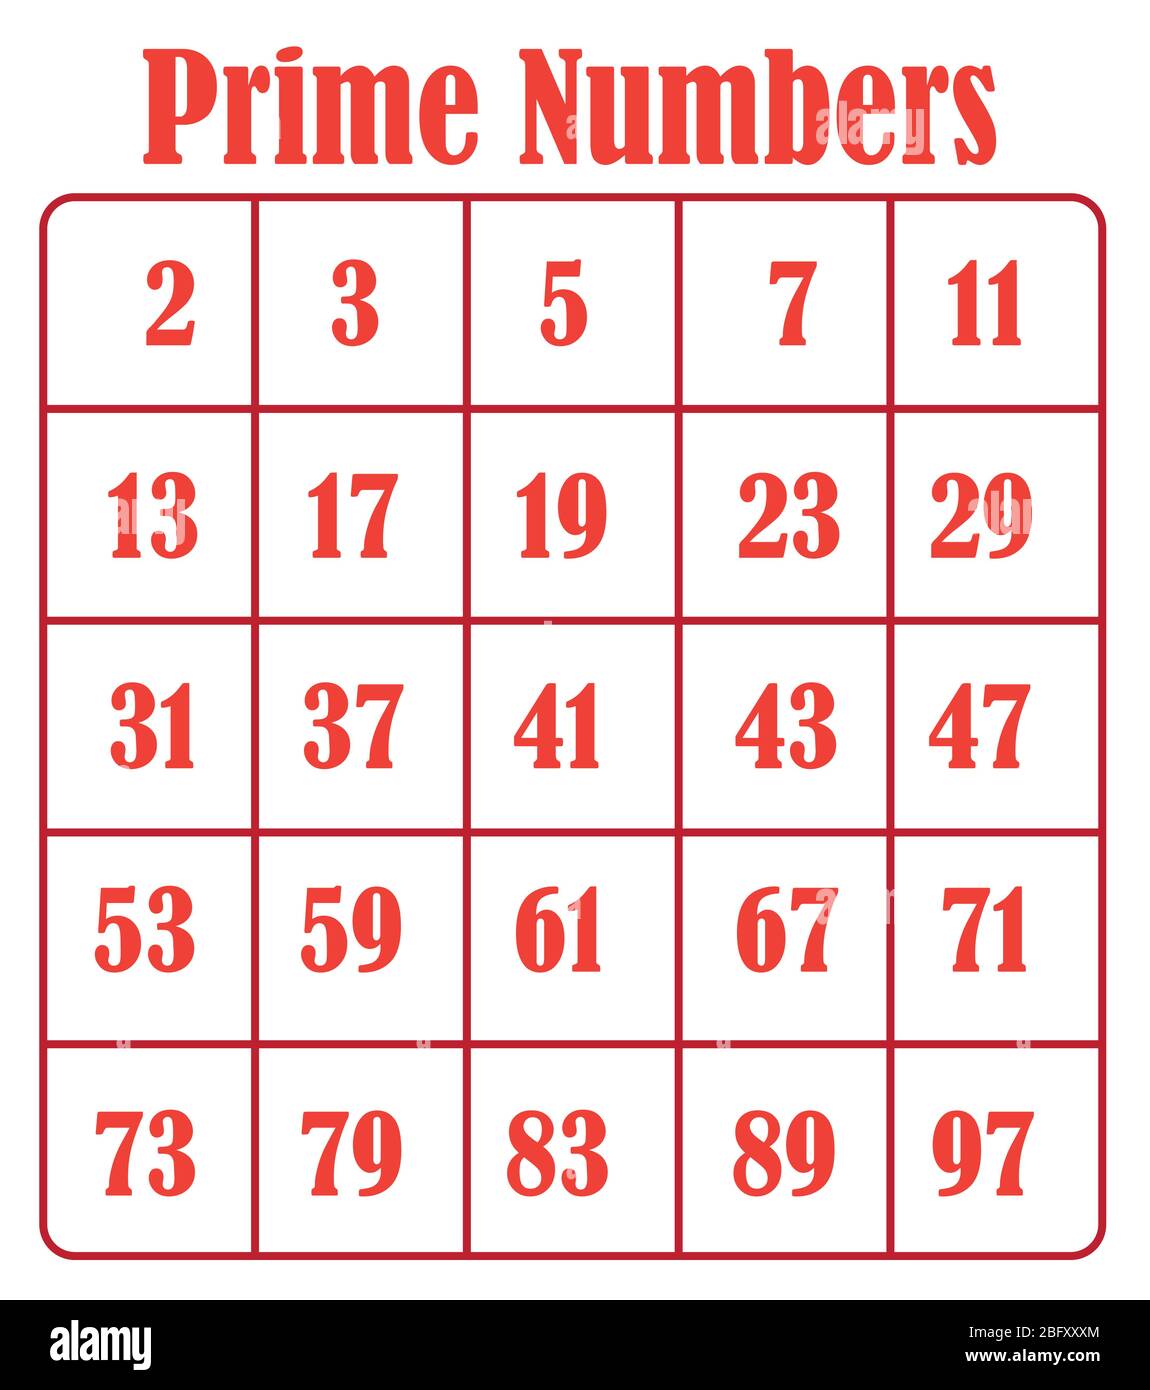 what is a list of prime numbers to 100